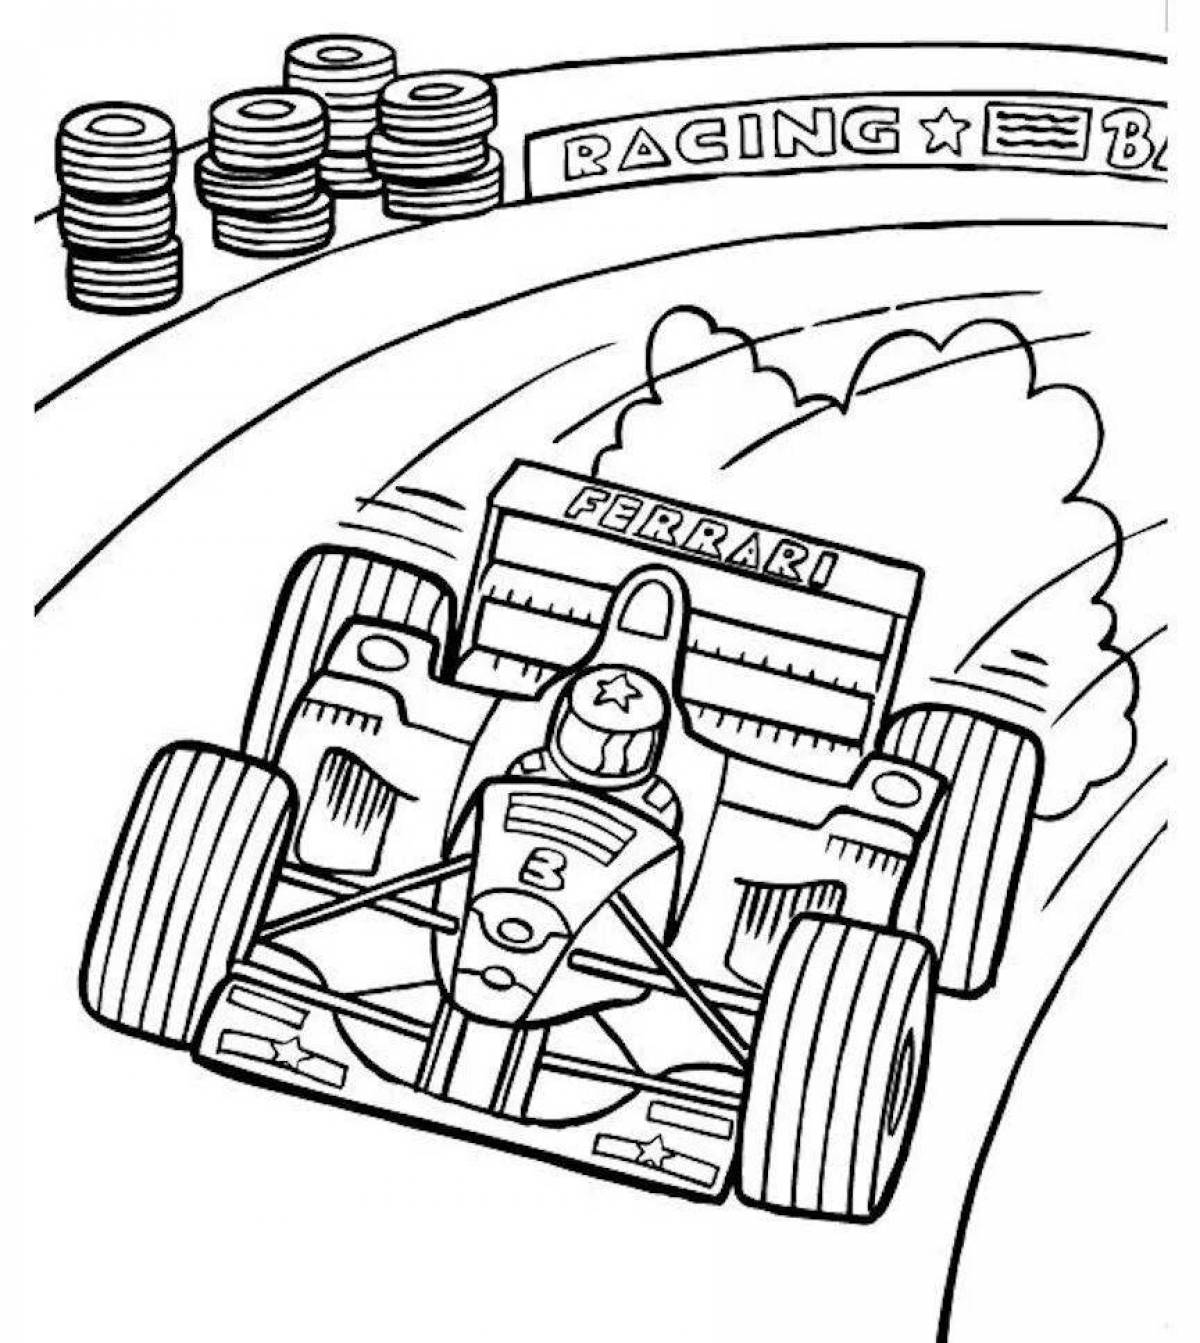 Coloring page tempting race track